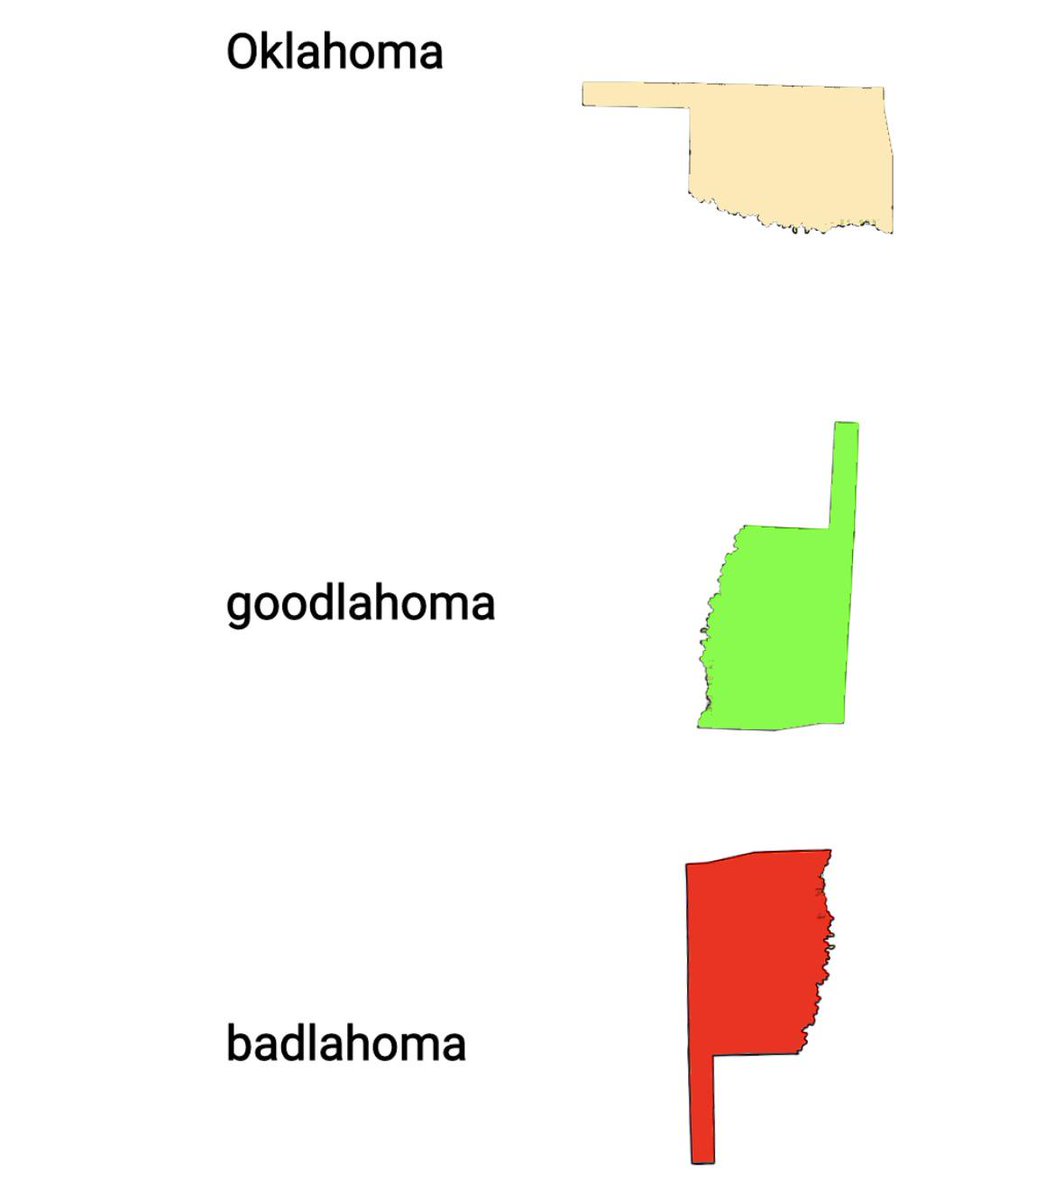 Oklahoma if it was used to express feelings